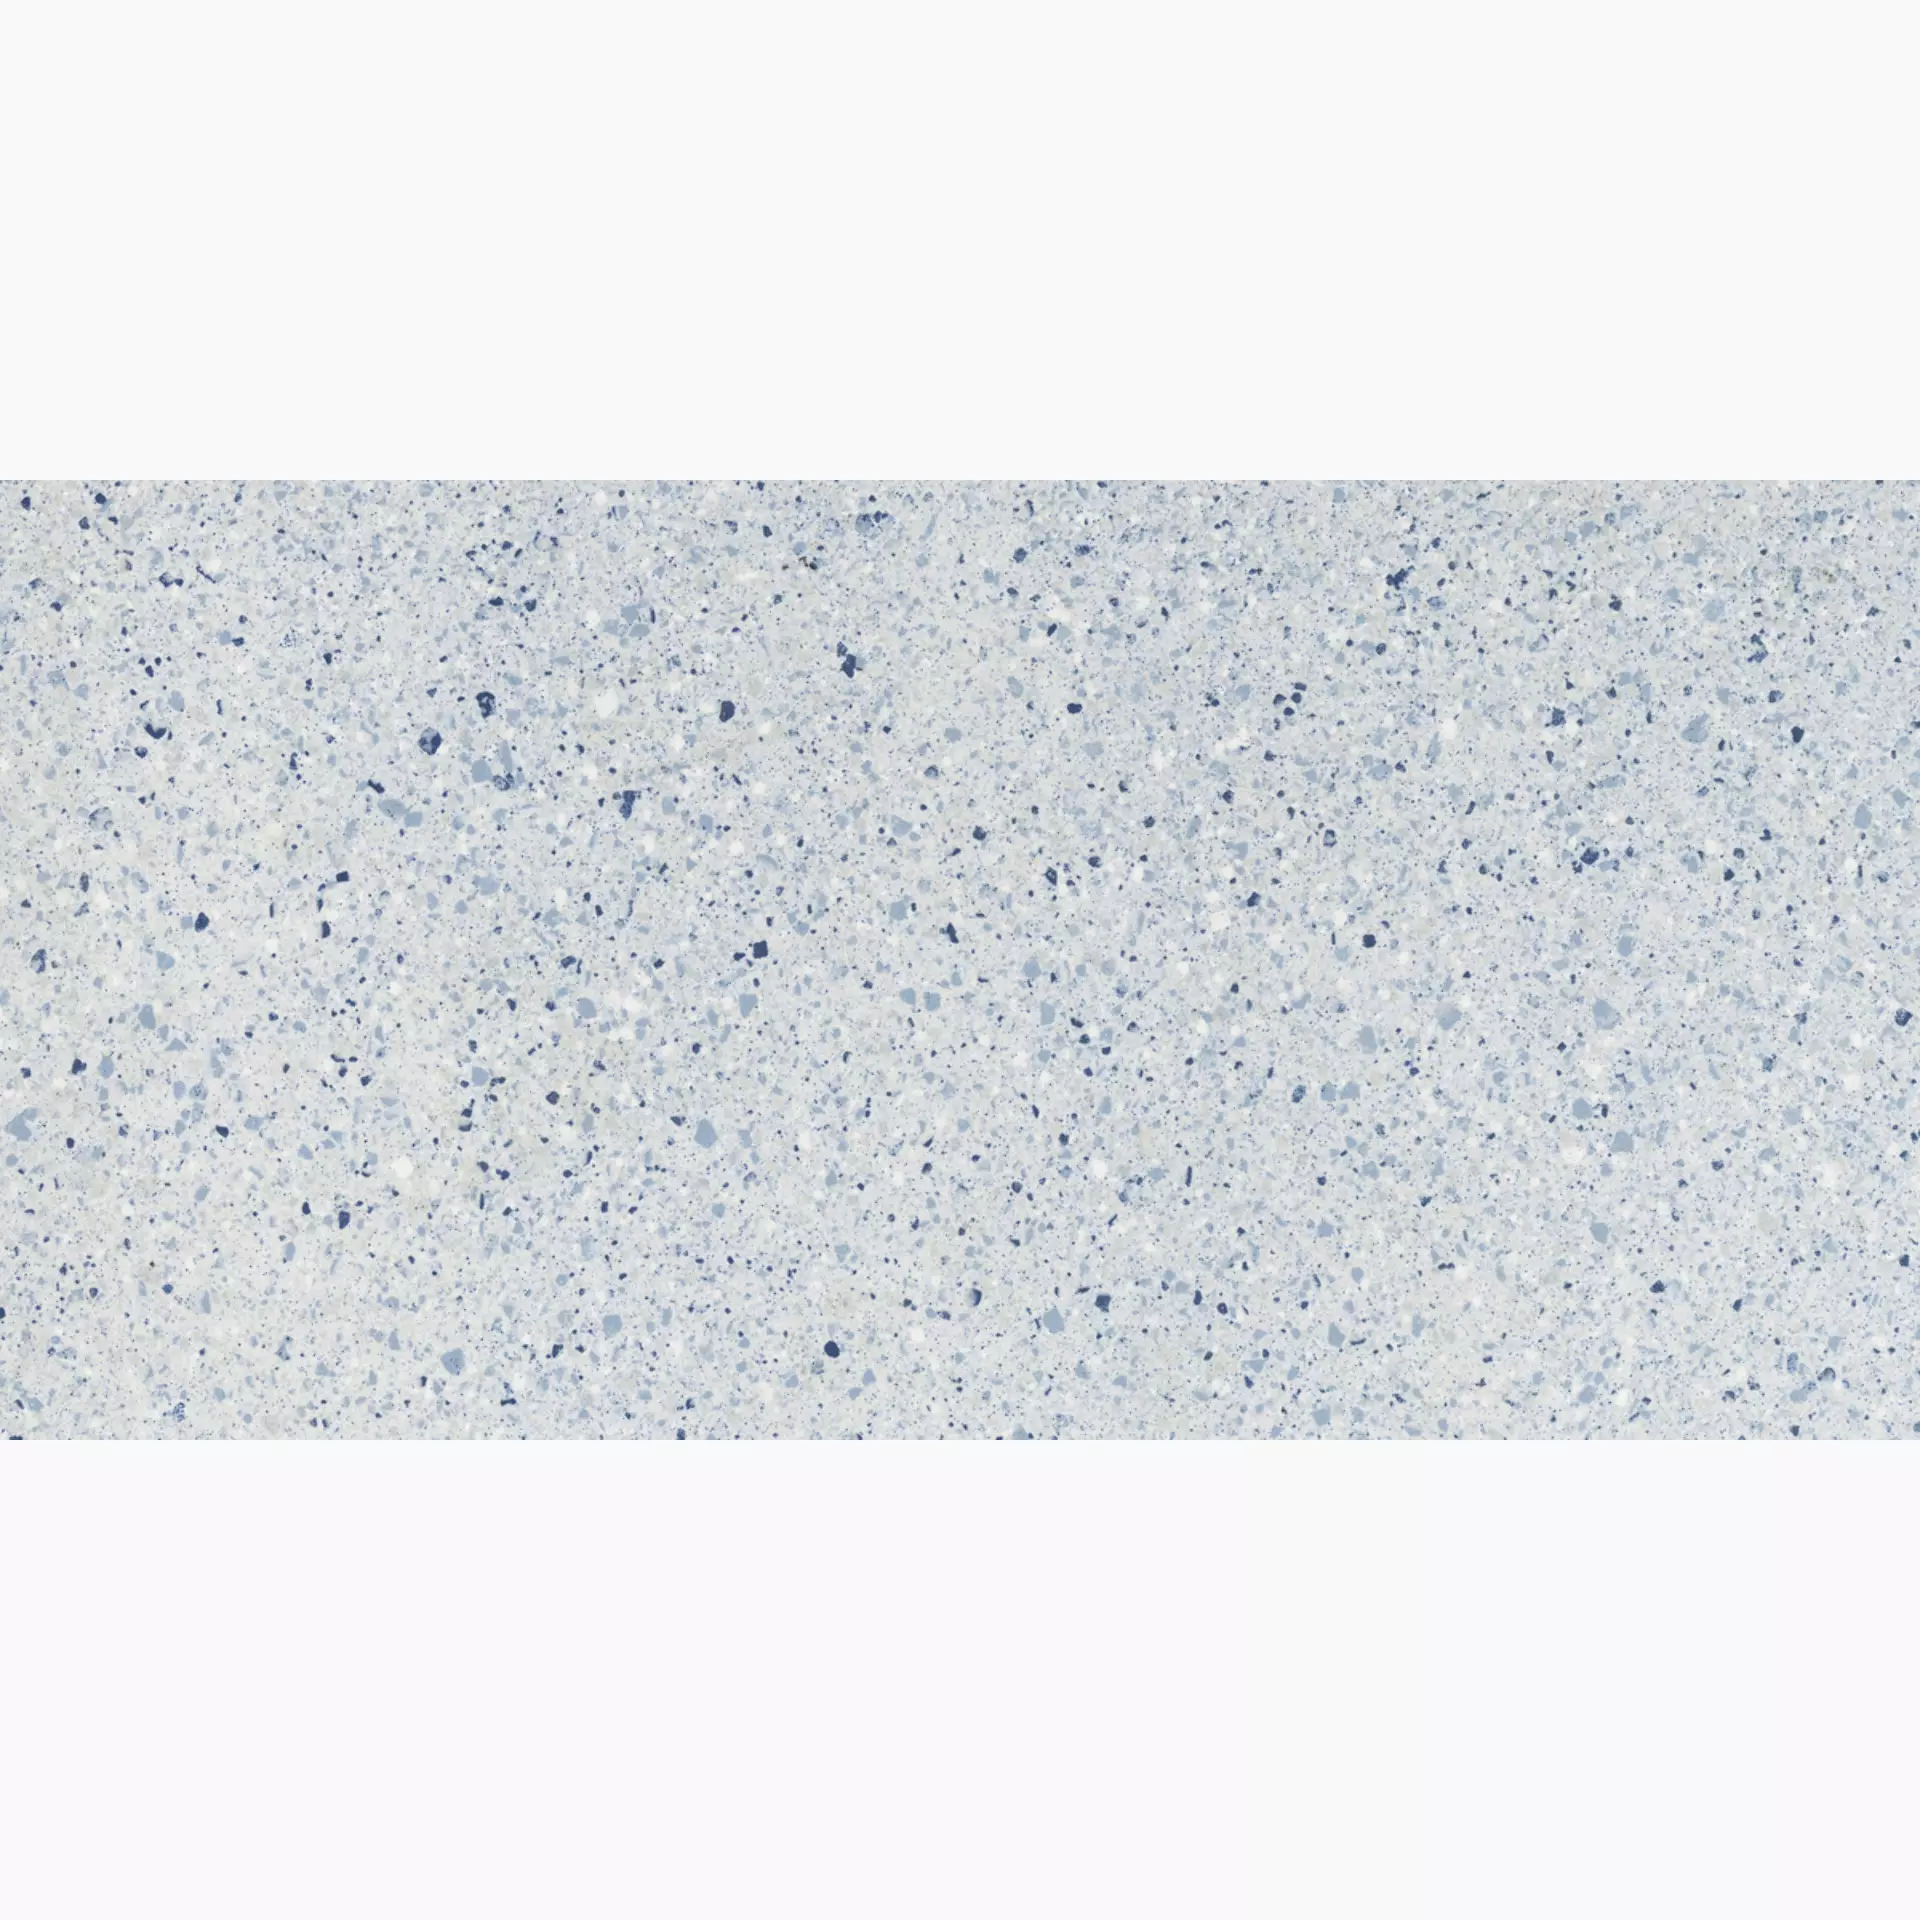 FMG Rialto Blue Naturale P62431 60x120cm rectified 10mm